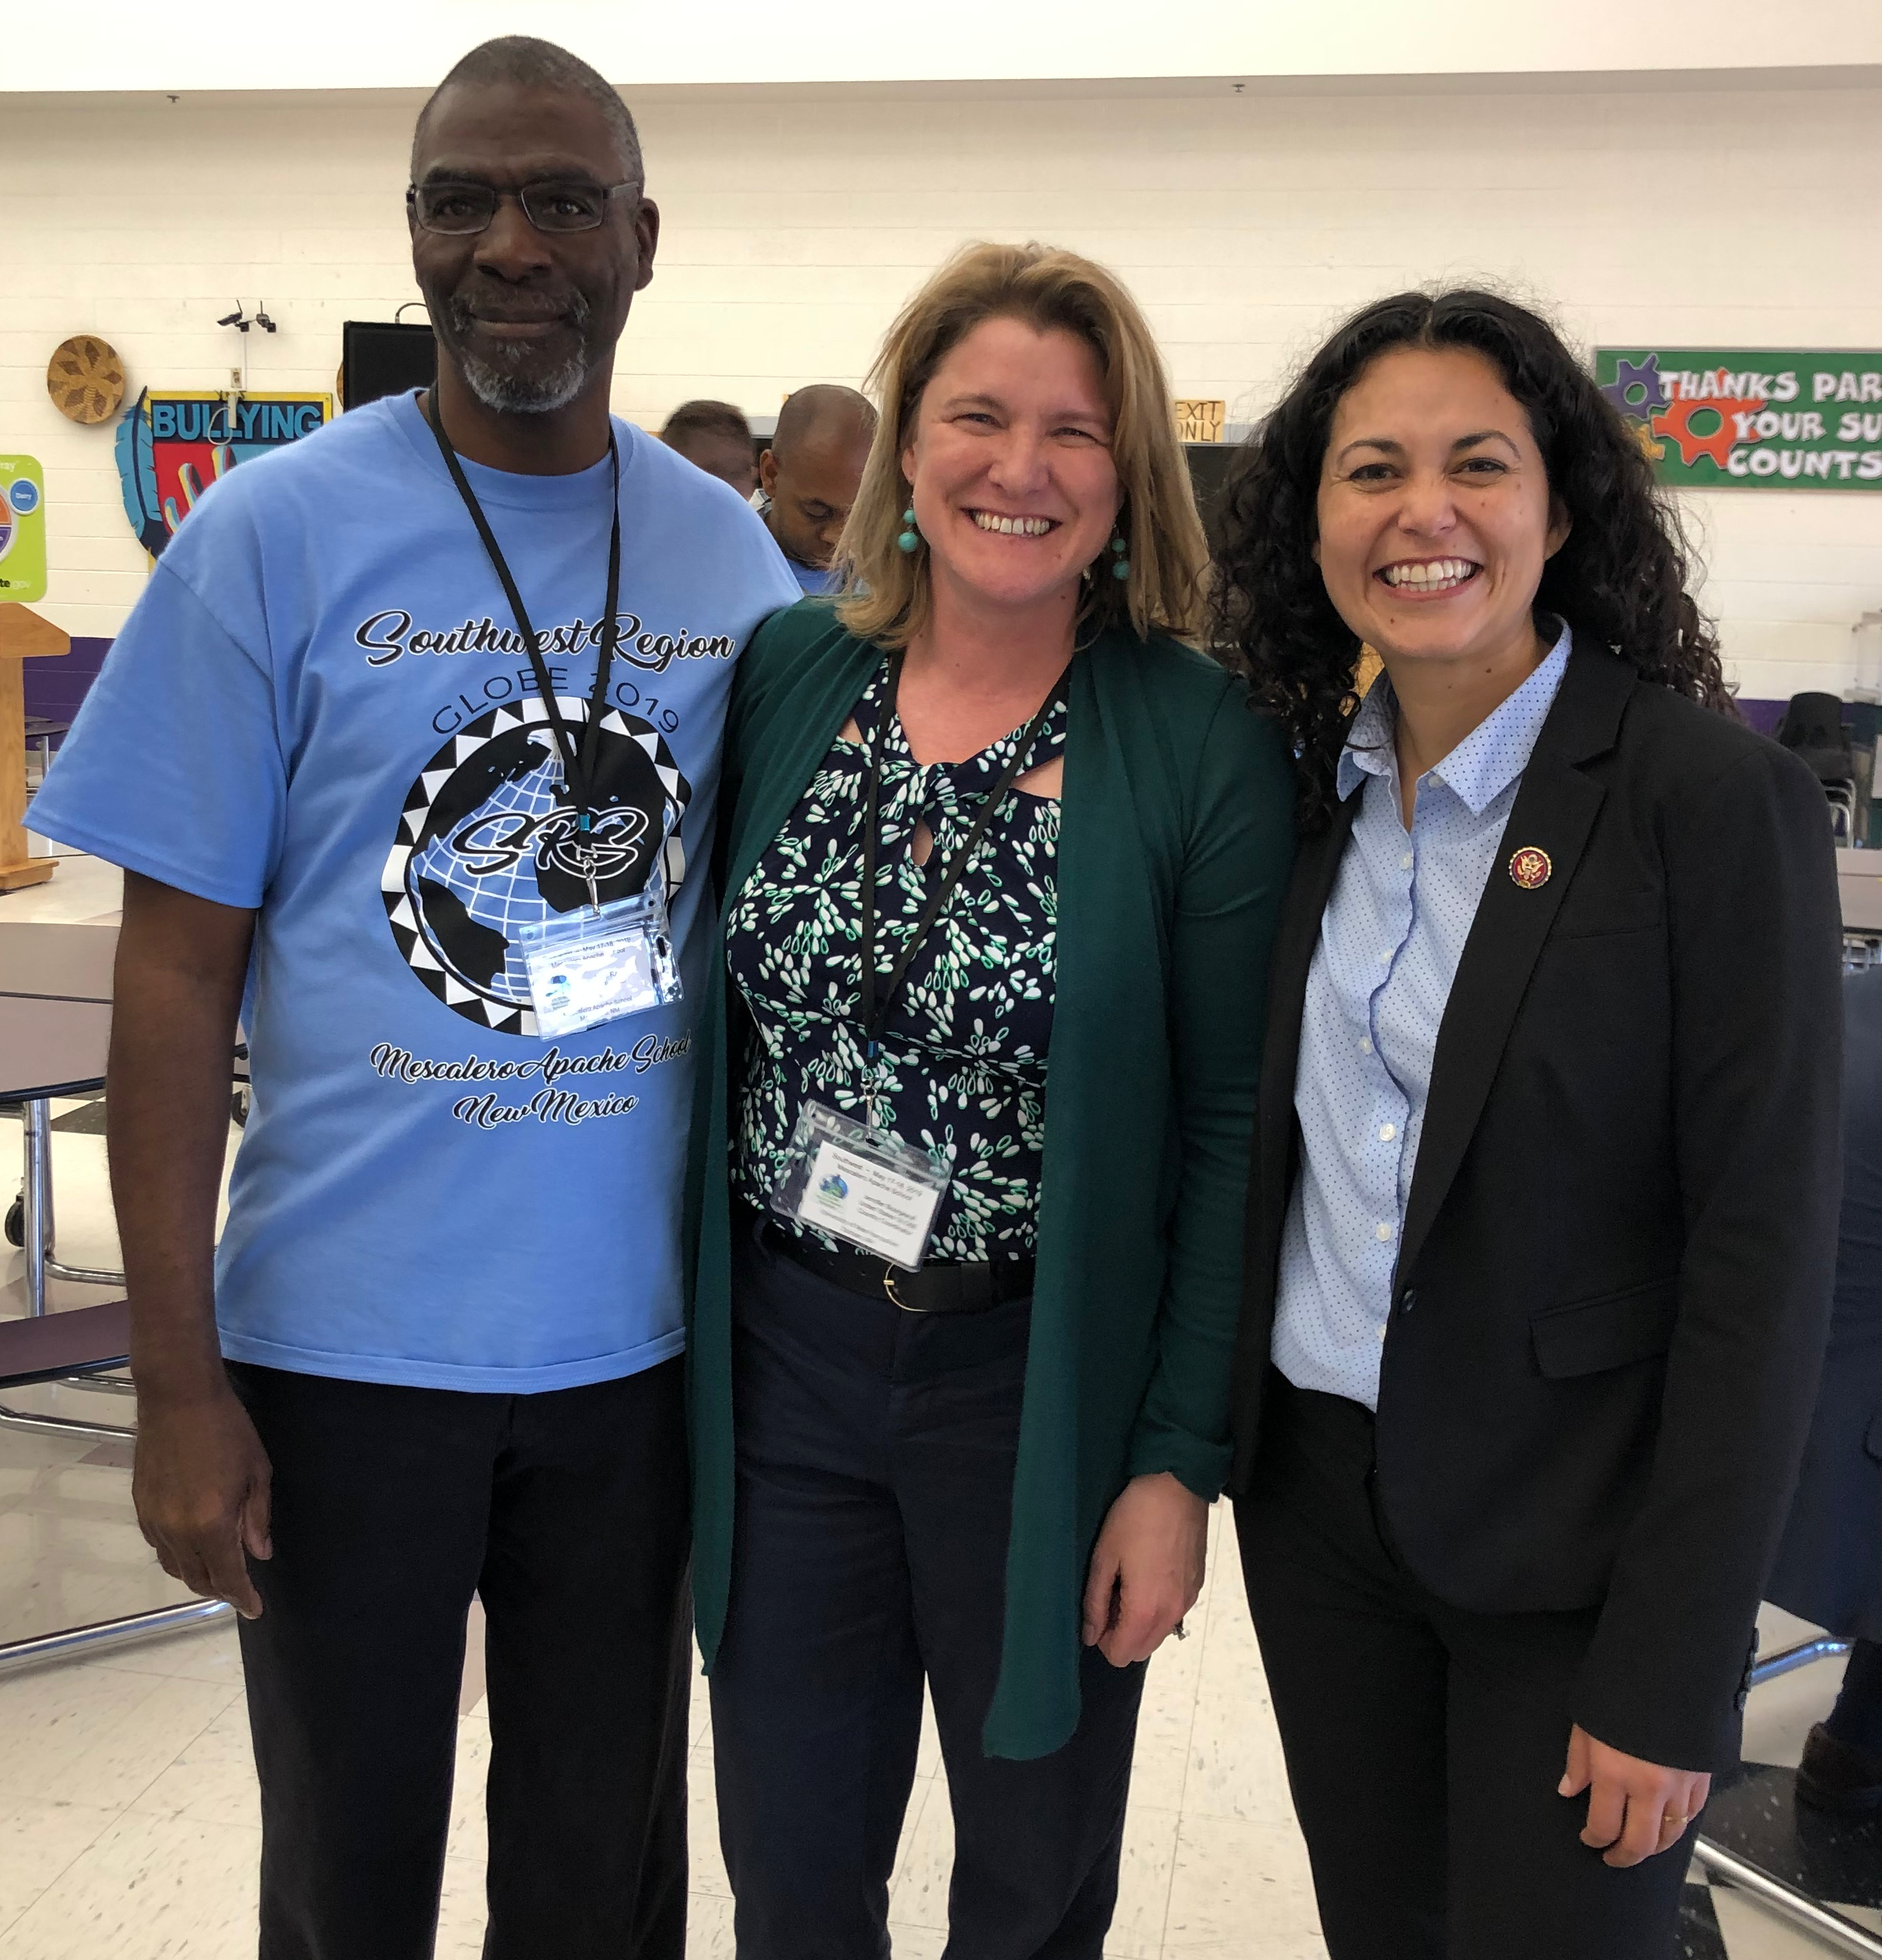 Nate Raynor, teacher and organizer, jennifer Bourgeault, US GLOBE Country Coordinator and Congresswoman Xochiti Torres-Small, smiling.